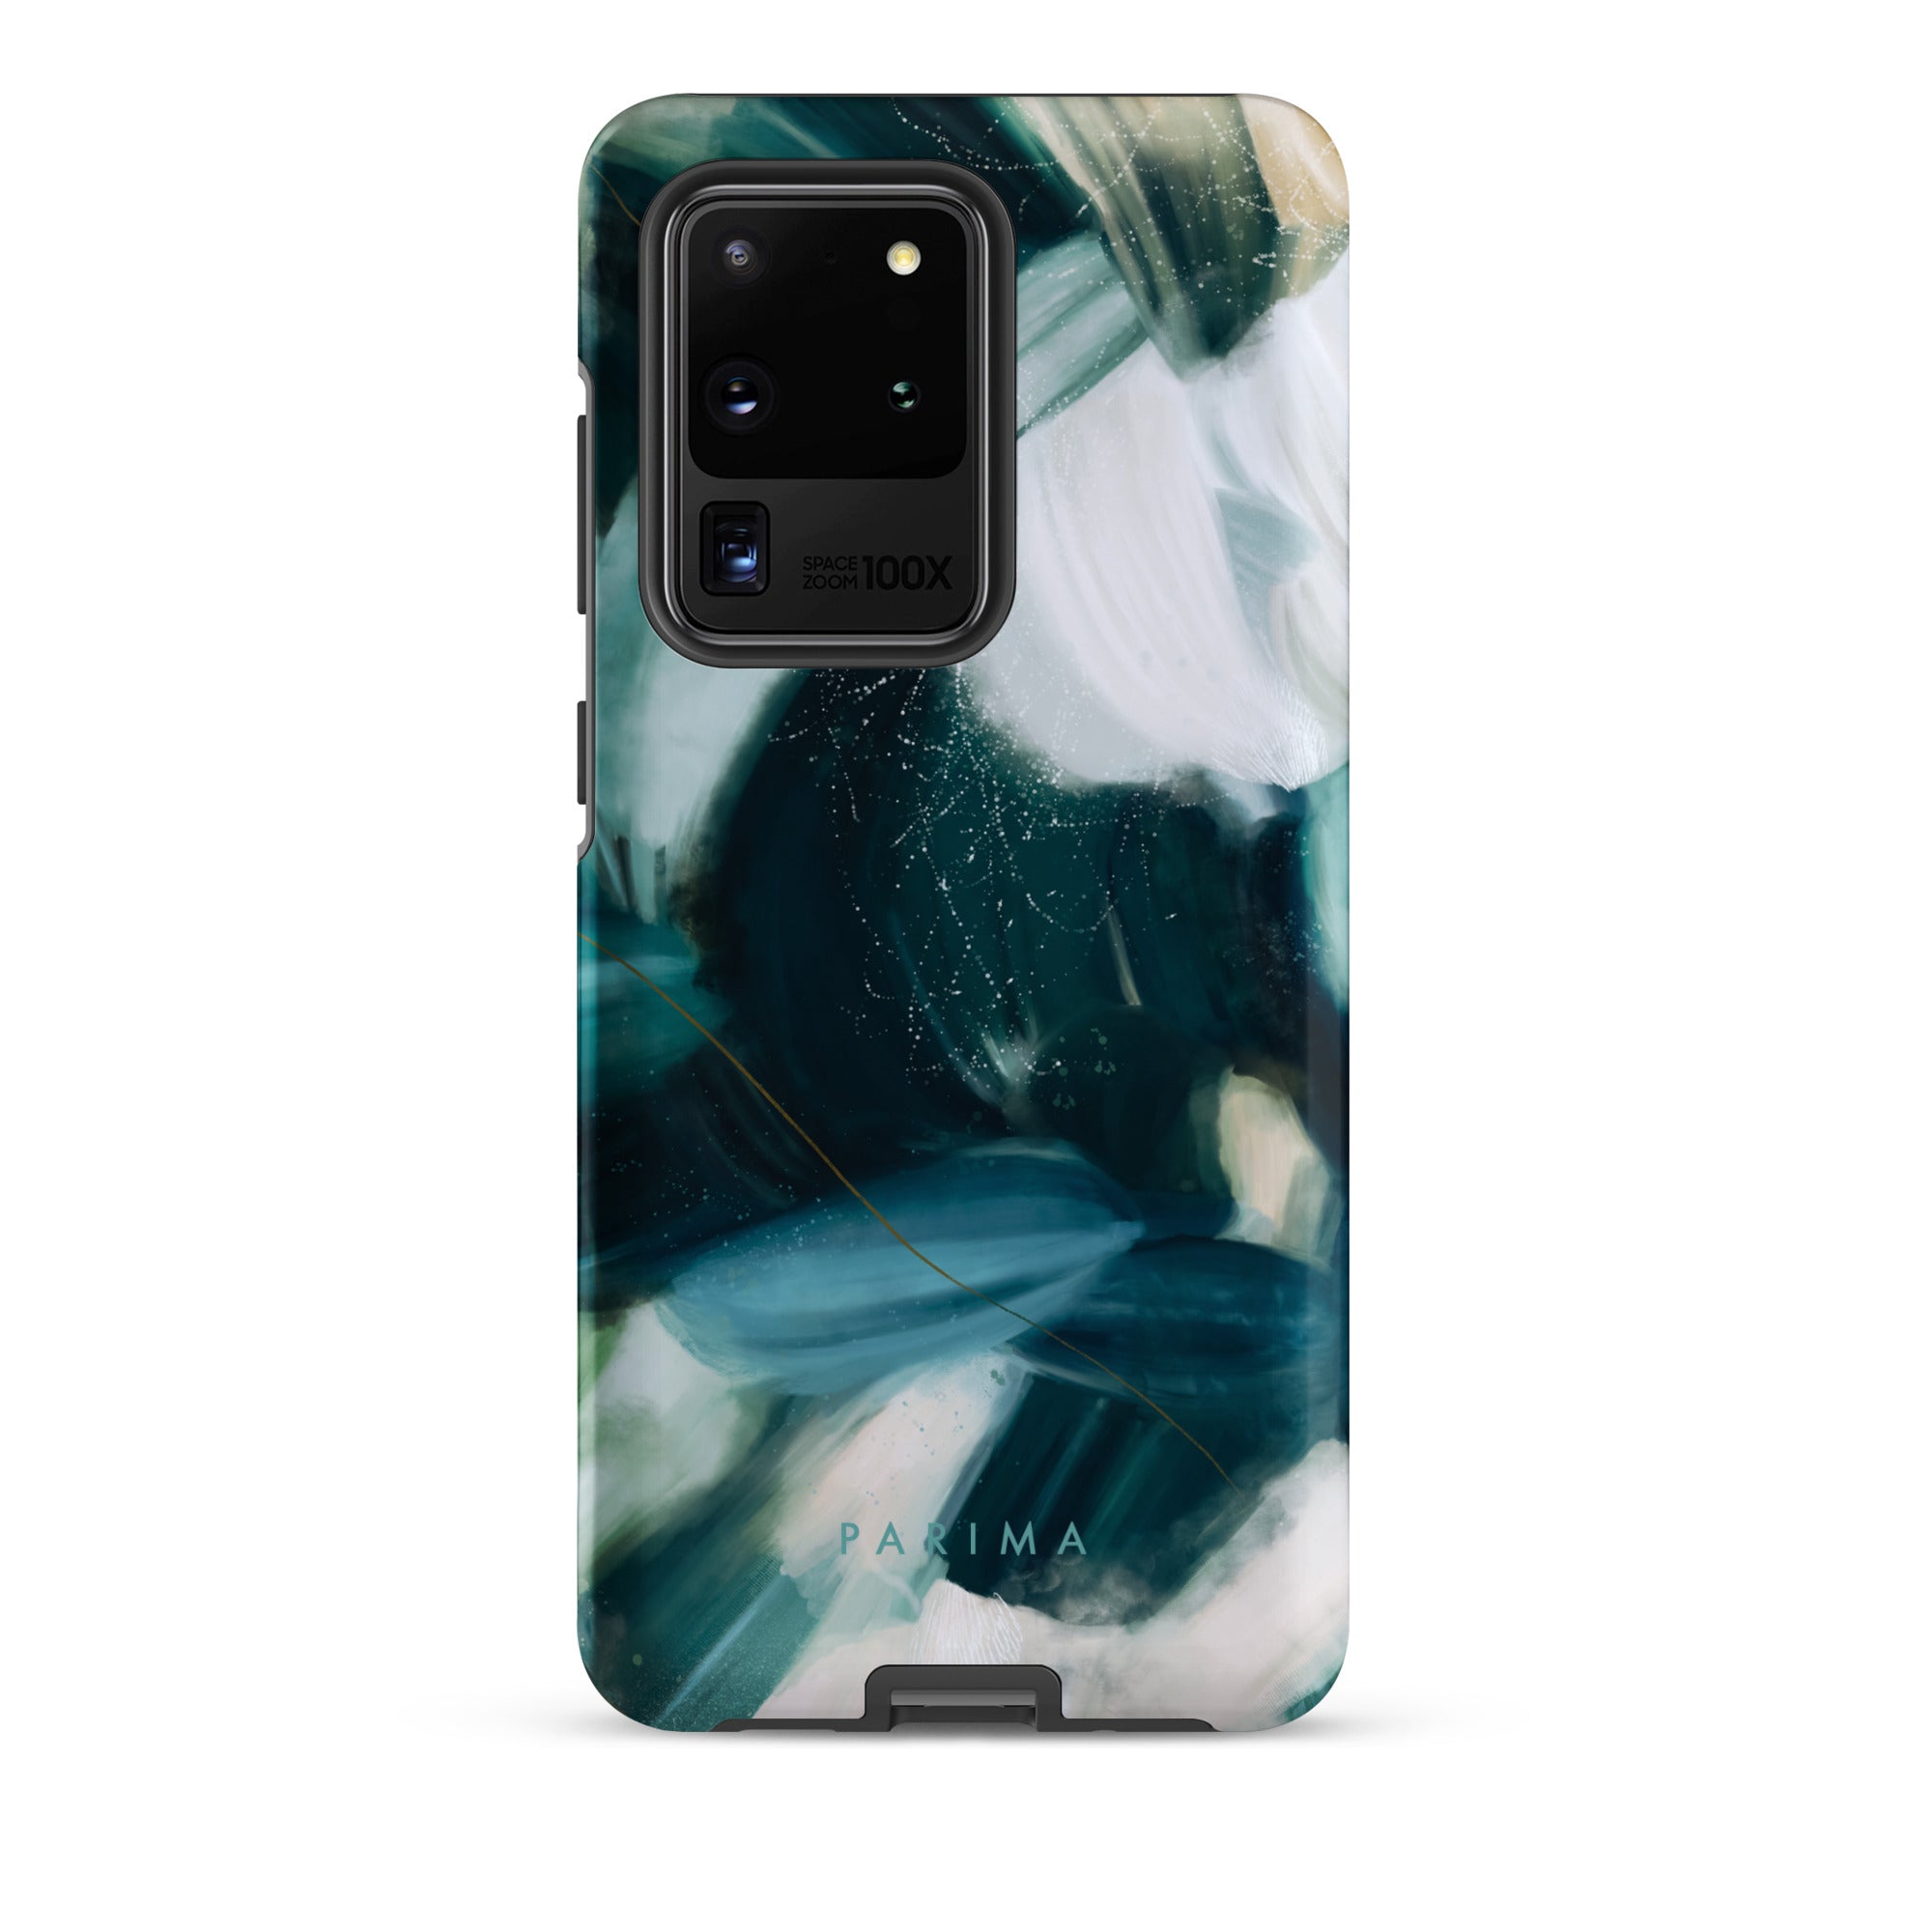 Caspian, blue and teal abstract art on Samsung Galaxy S20 Ultra tough case by Parima Studio